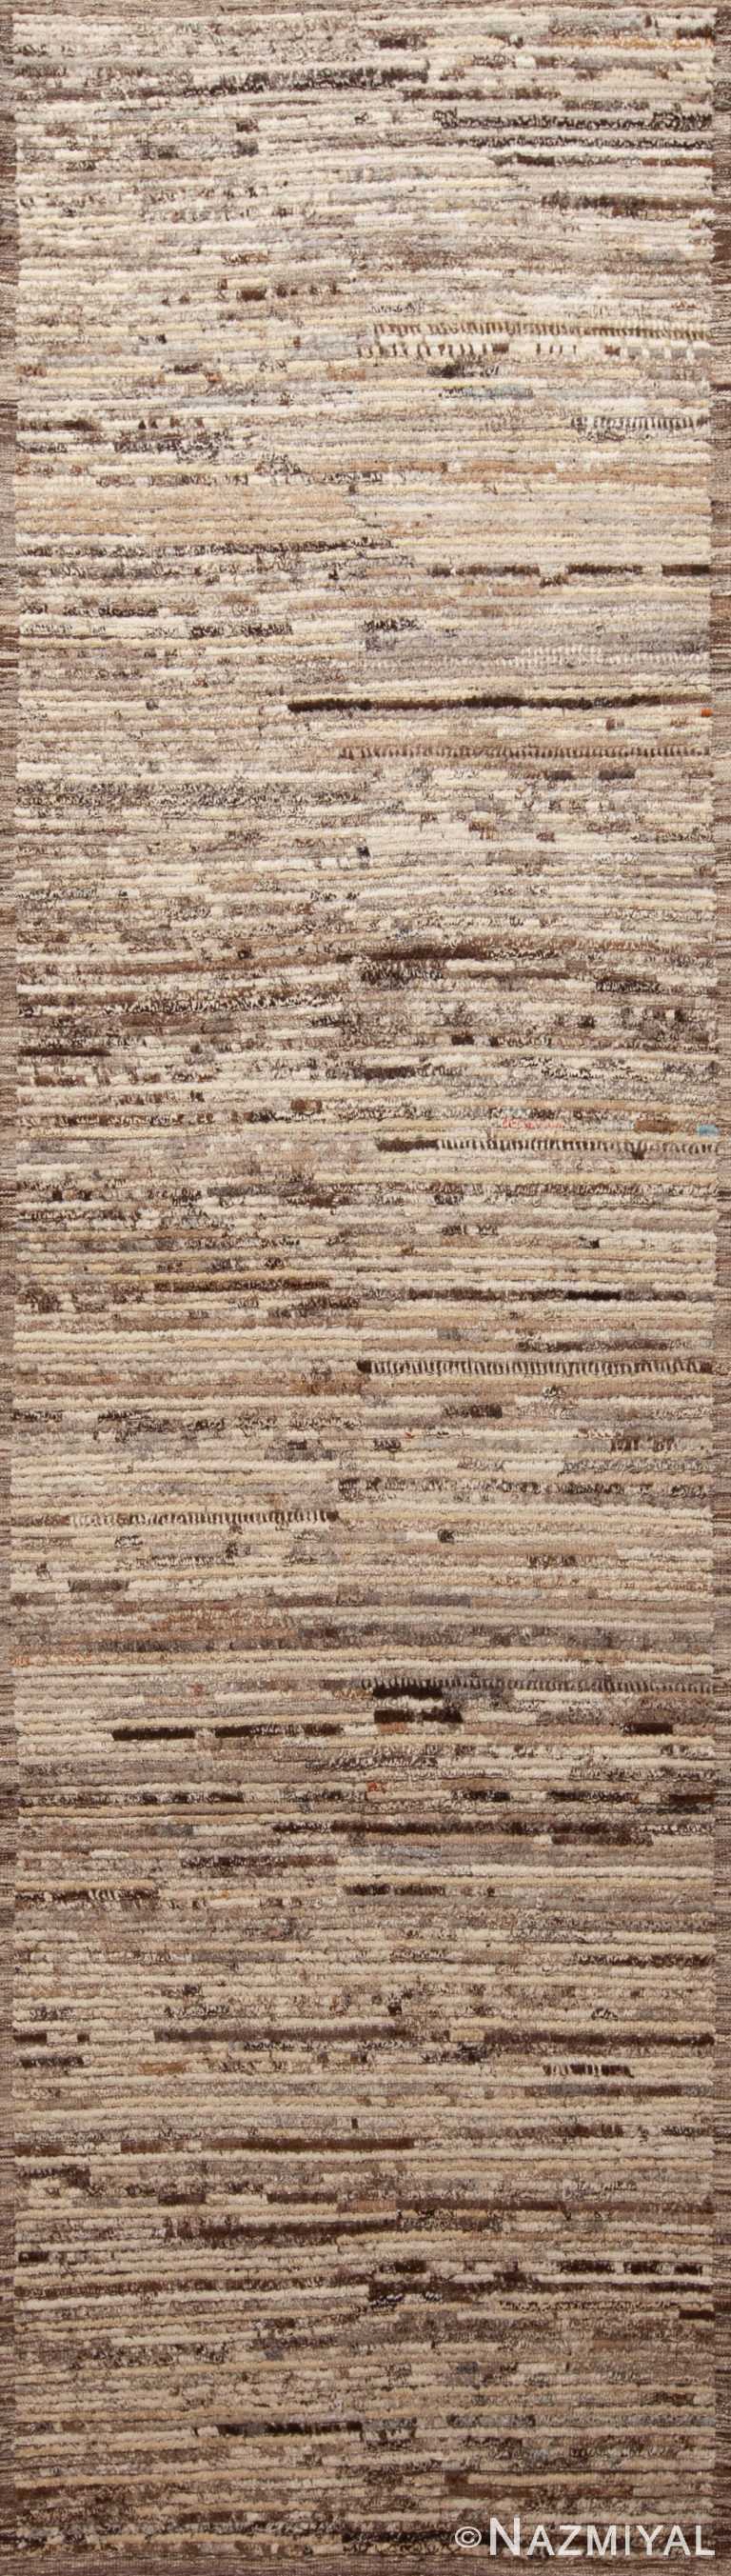 Neutral Earthy Brown Color Abstract Abrash pattern Modern Hallway Runner Rug 11123 by Nazmiyal Antique rugs